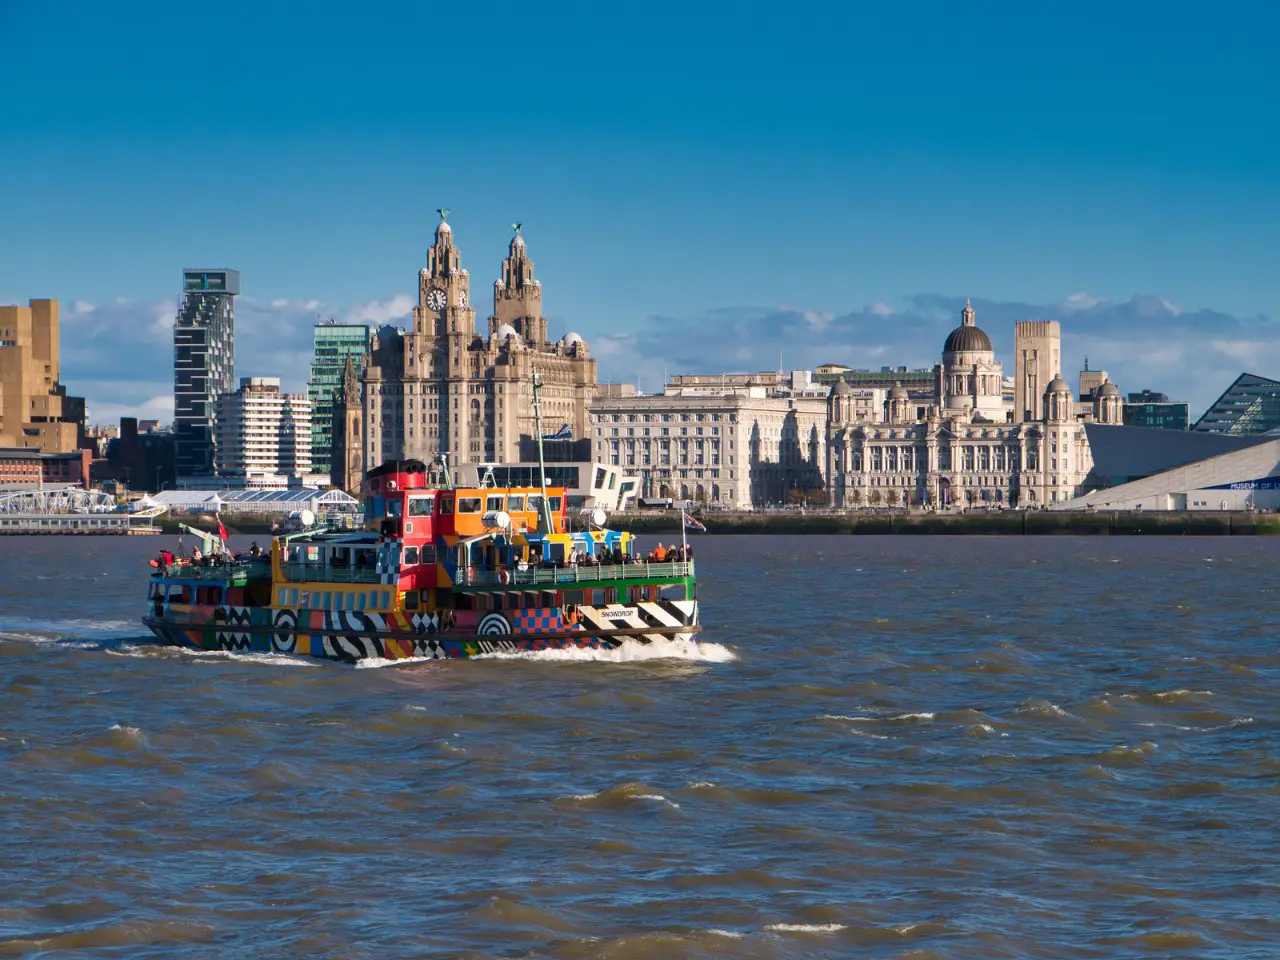 The Mersey Ferry sailing along the River Mersey in Liverpool with the Liver Building in the background